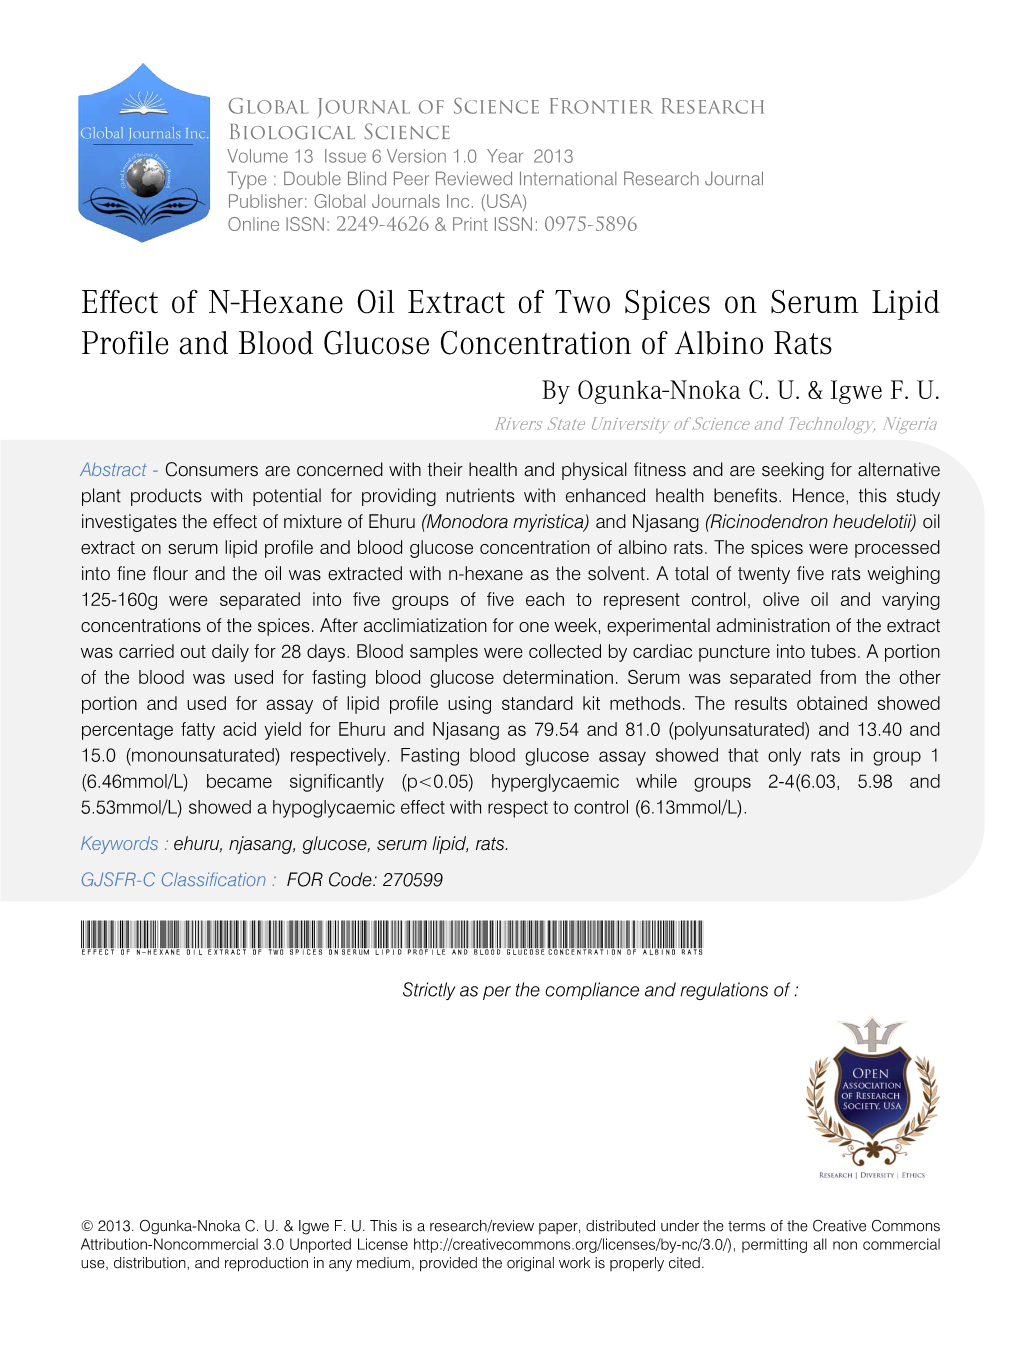 Effect of N-Hexane Oil Extract of Two Spices on Serum Lipid Profile and Blood Glucose Concentration of Albino Rats by Ogunka-Nnoka C